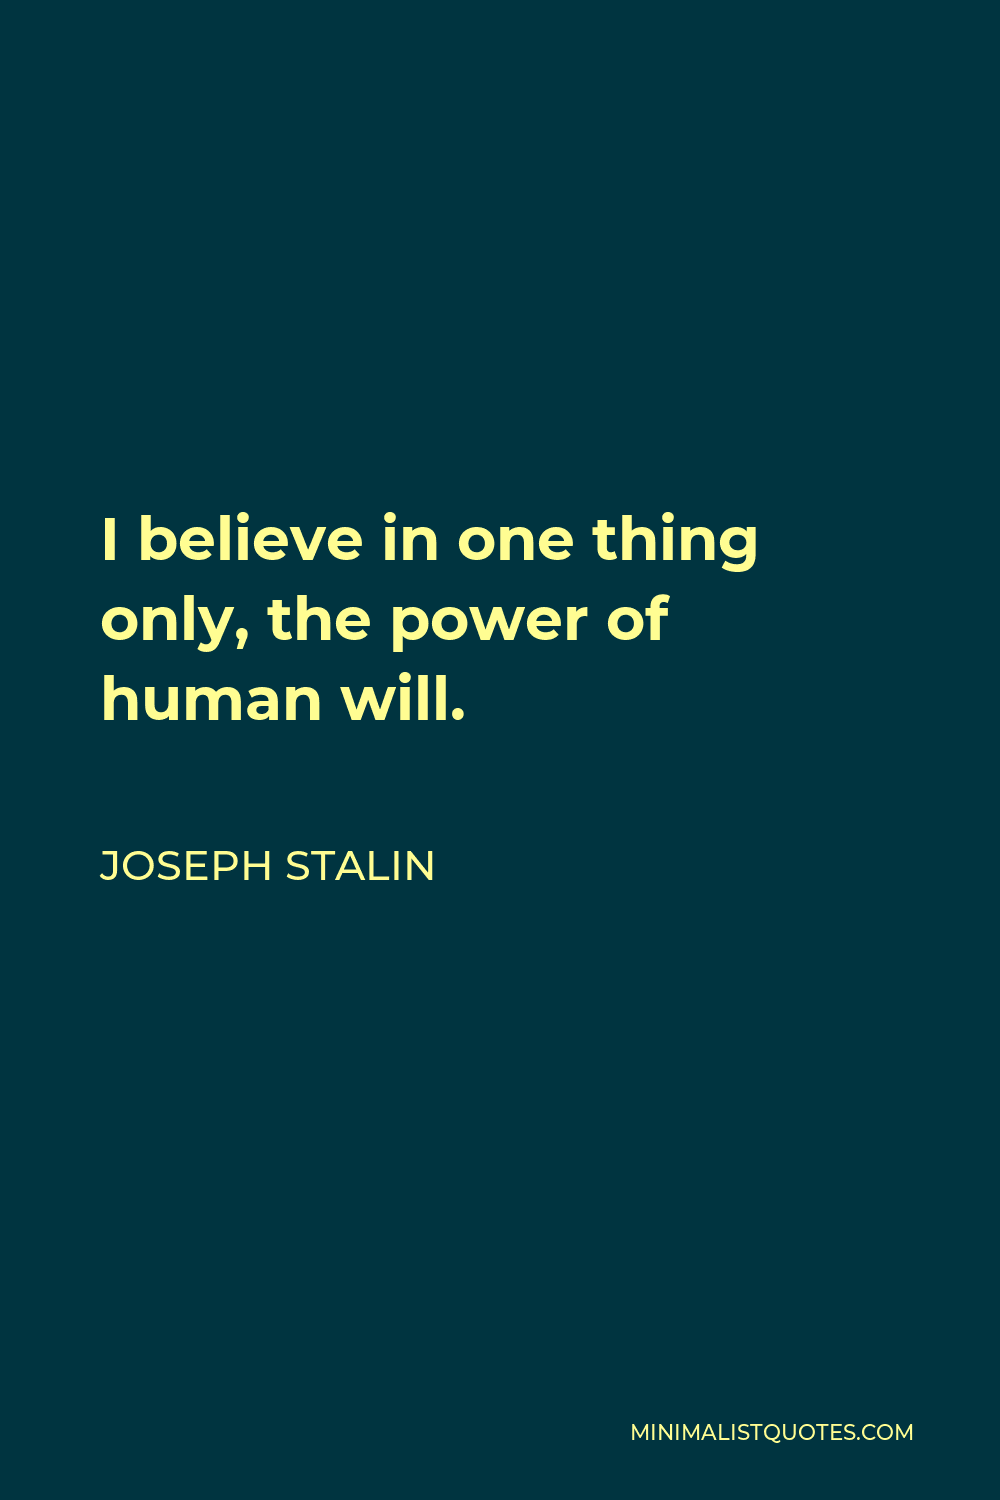 Joseph Stalin Quote - I believe in one thing only, the power of human will.